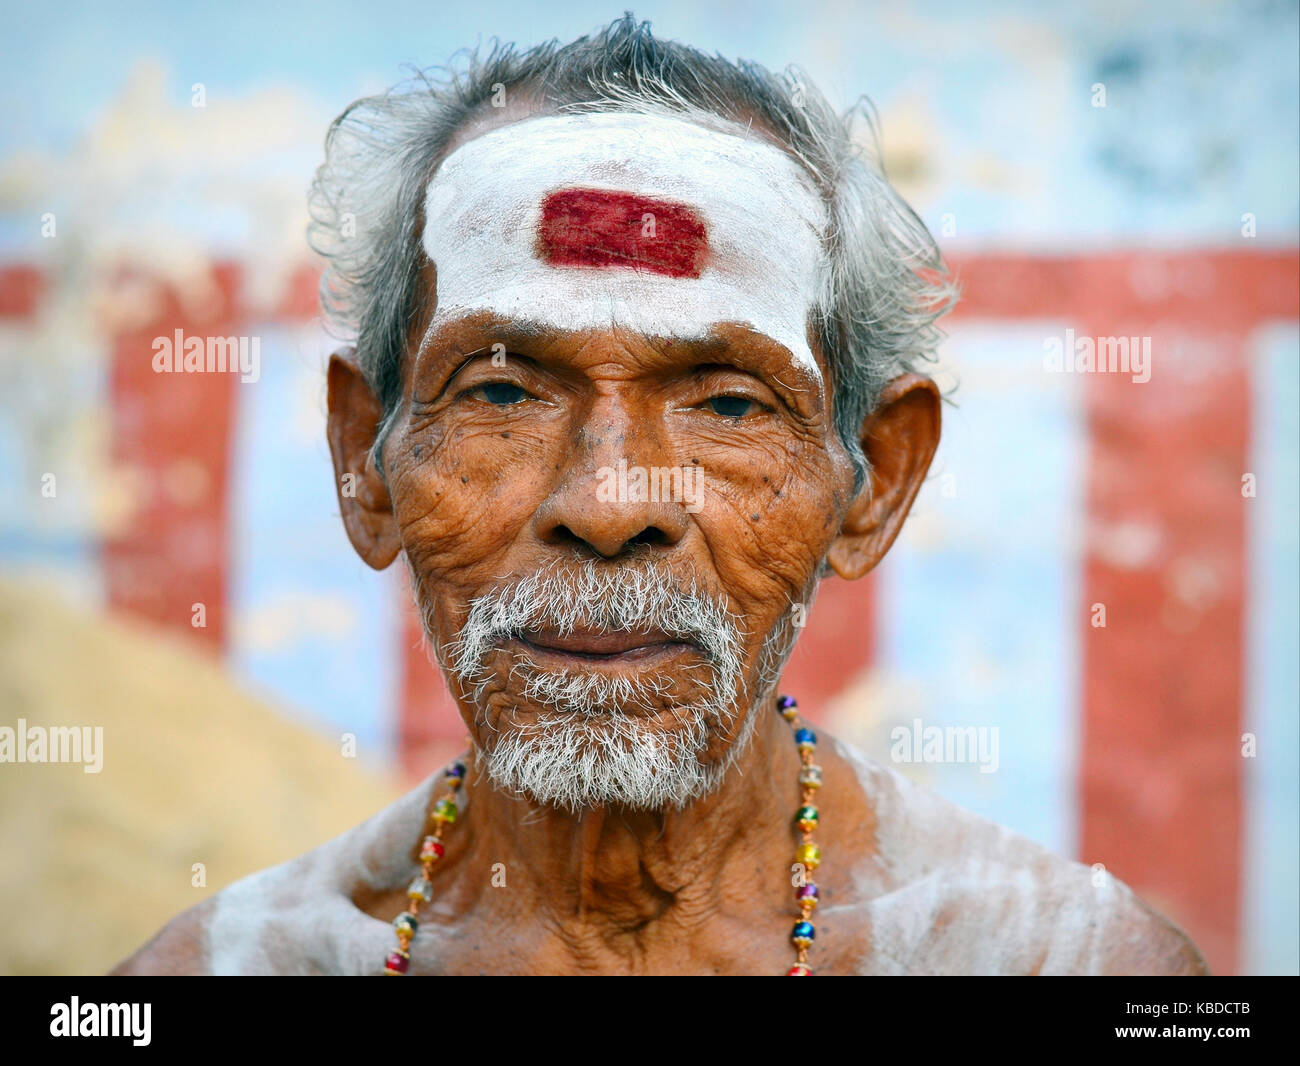 Old Shaivite Brahmin with white vibhuti and an almost rectangular, red tilaka mark (symbolic third eye) on his forehead Stock Photo